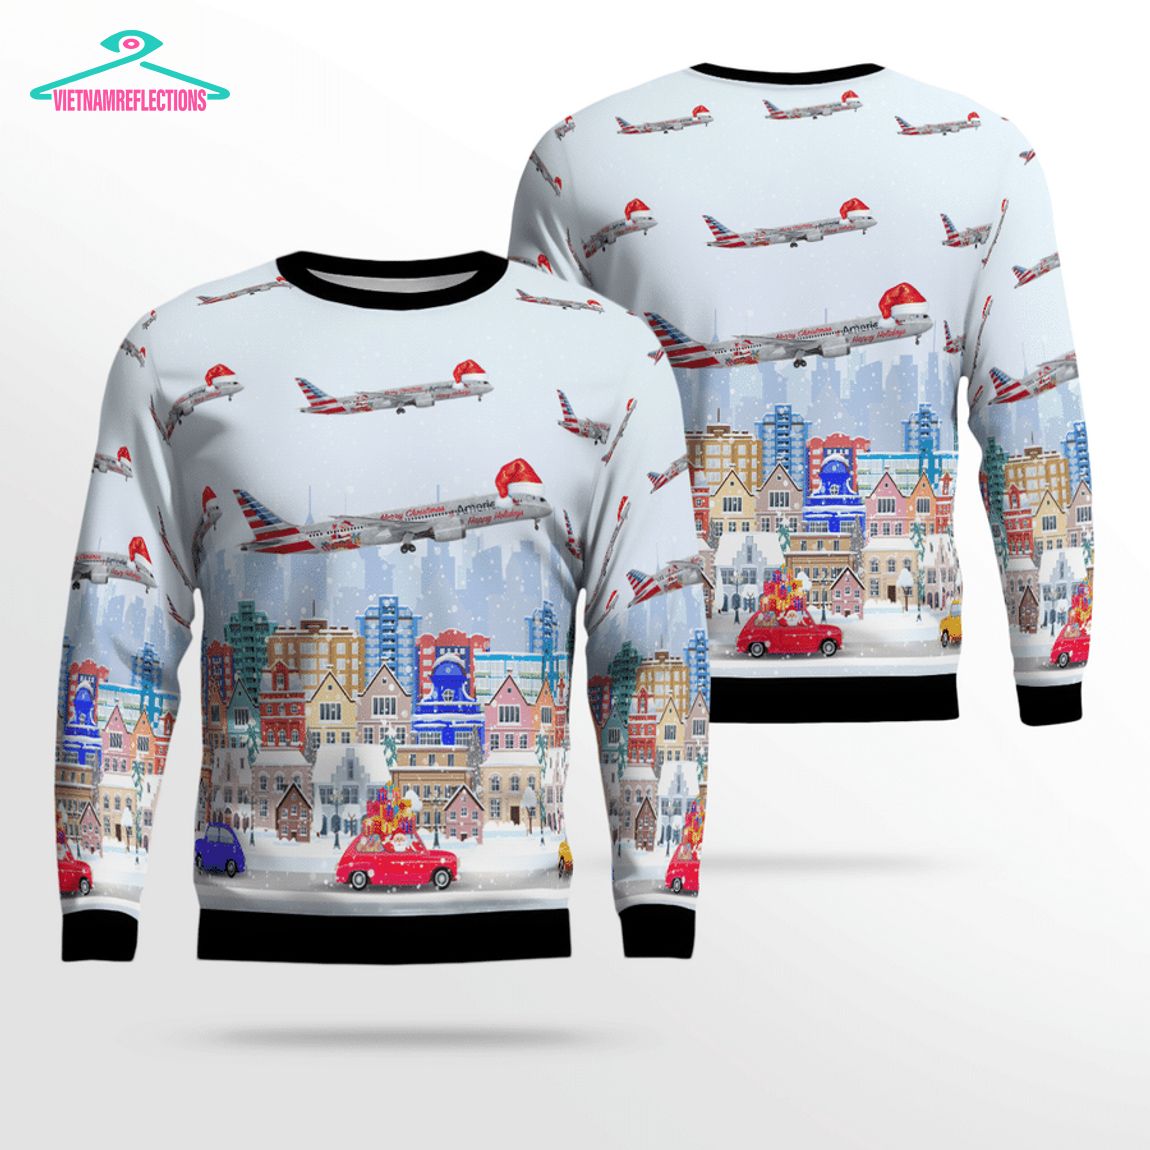 american-airlines-boeing-787-9-holiday-dreamliner-3d-christmas-sweater-1-wDc4v.jpg